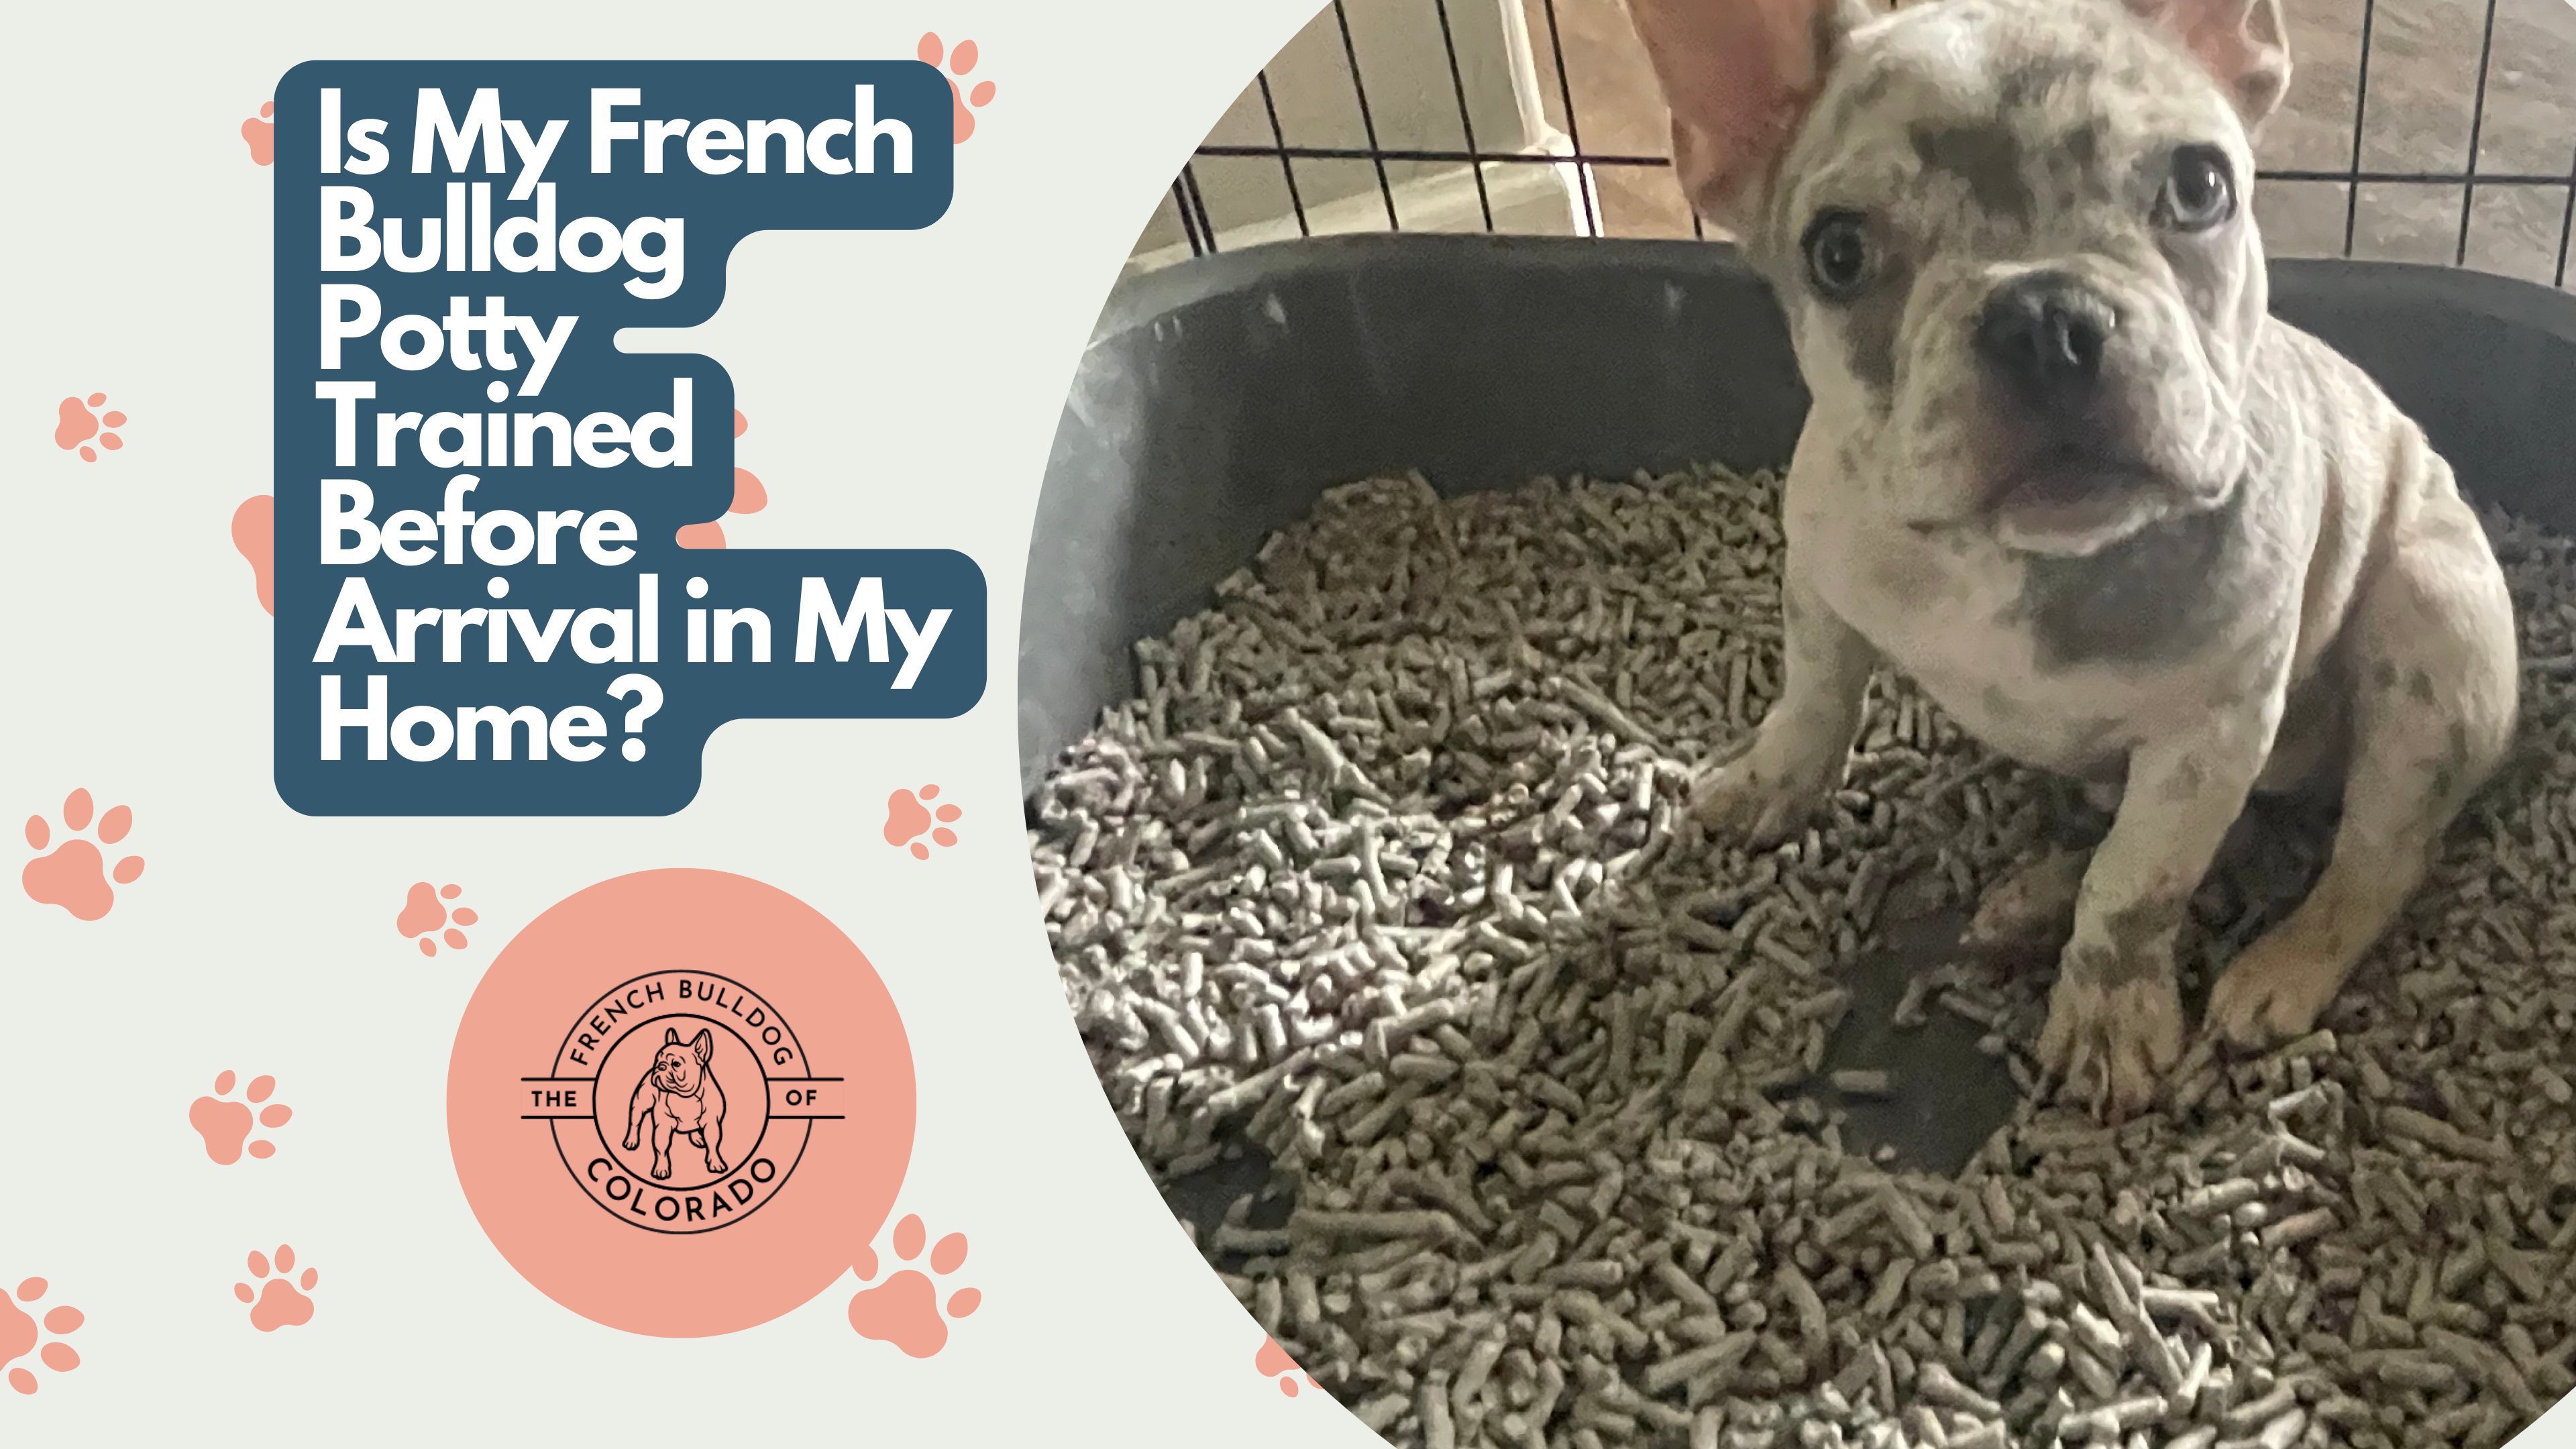 Is My French Bulldog Potty Trained Before Arrival in My Home?